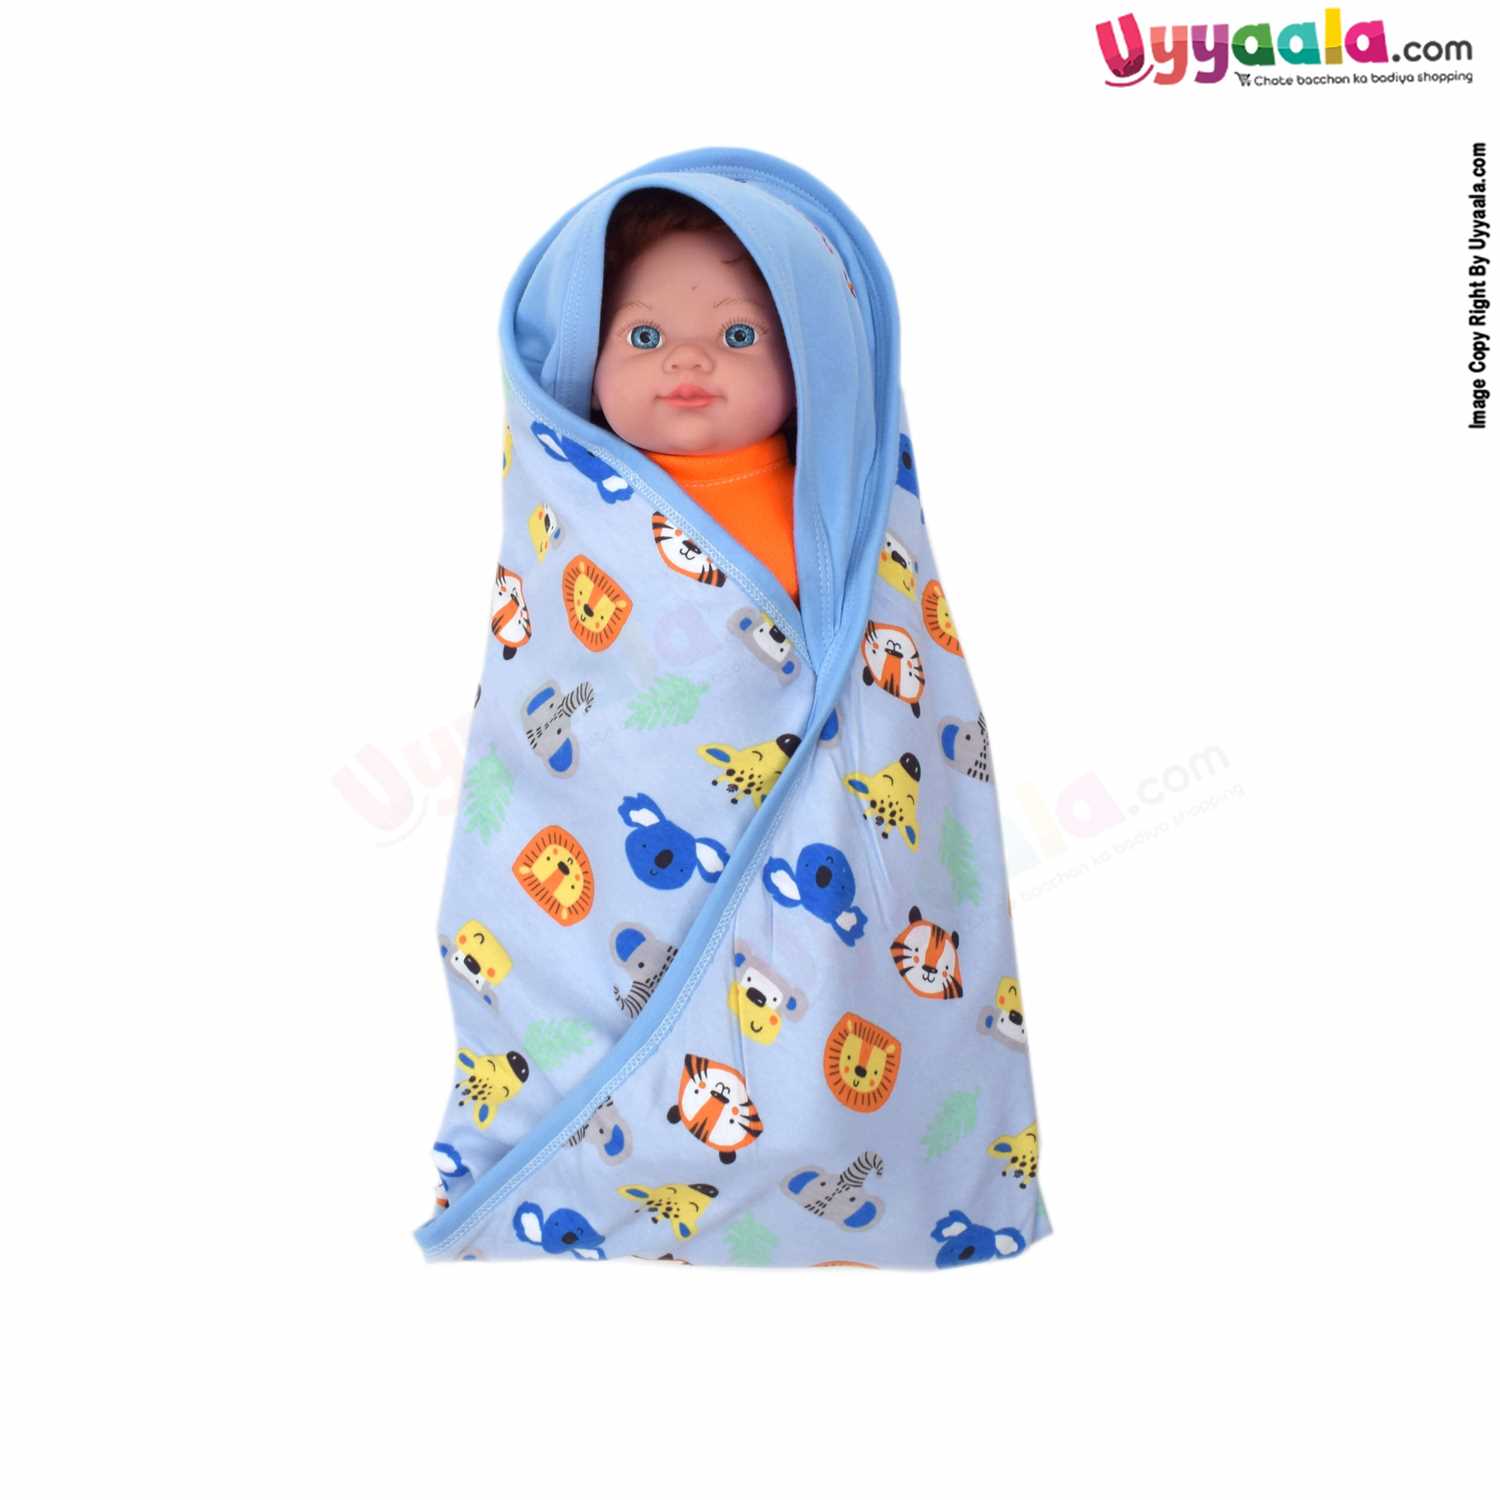 Baby Hooded Towel Premium Double Layered,100% Cotton Hosiery with Animals Print